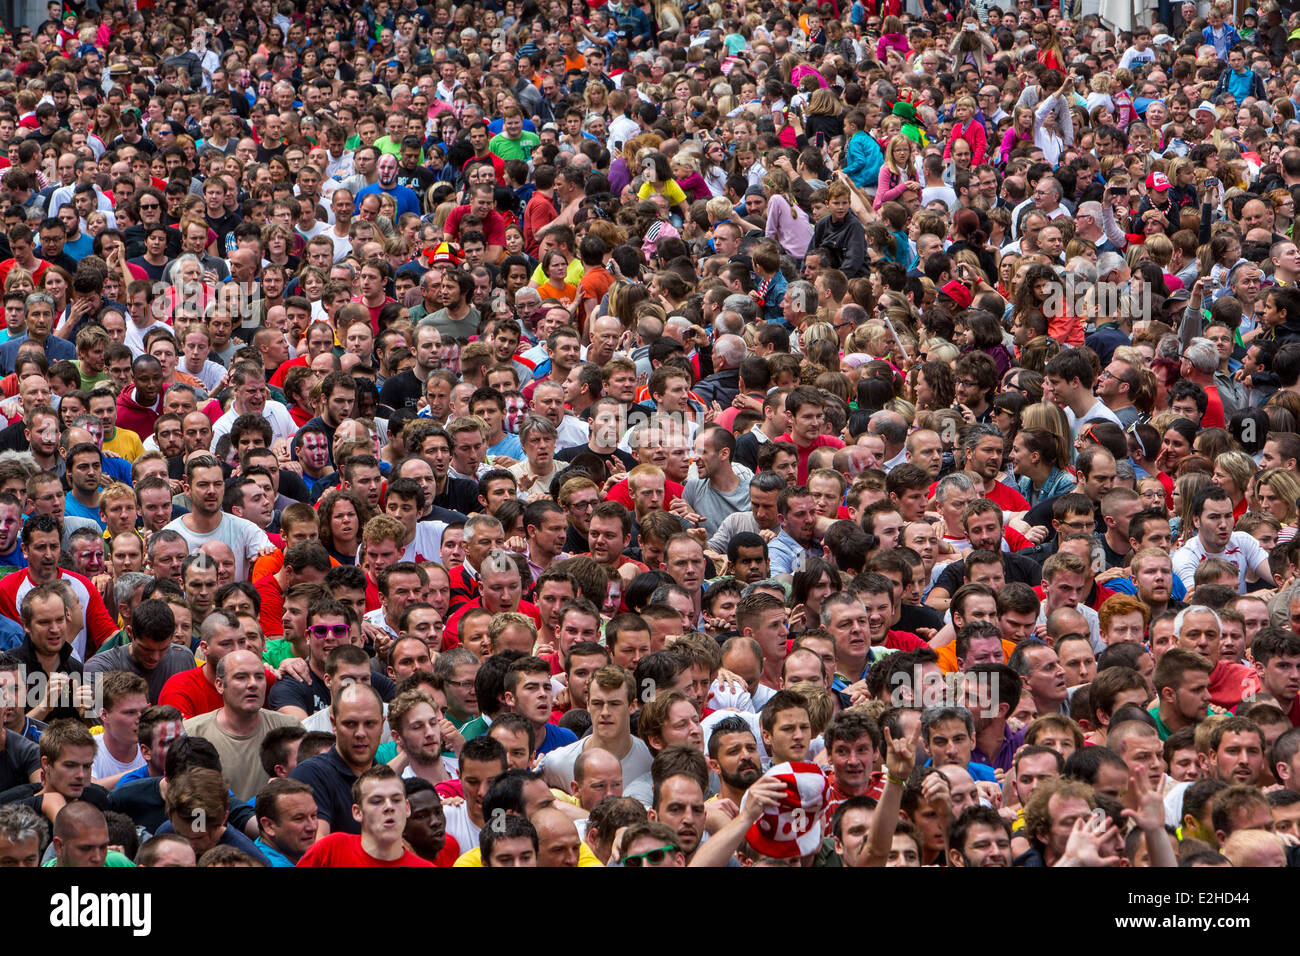 Crowd, many people in confined space, at a festival, Stock Photo